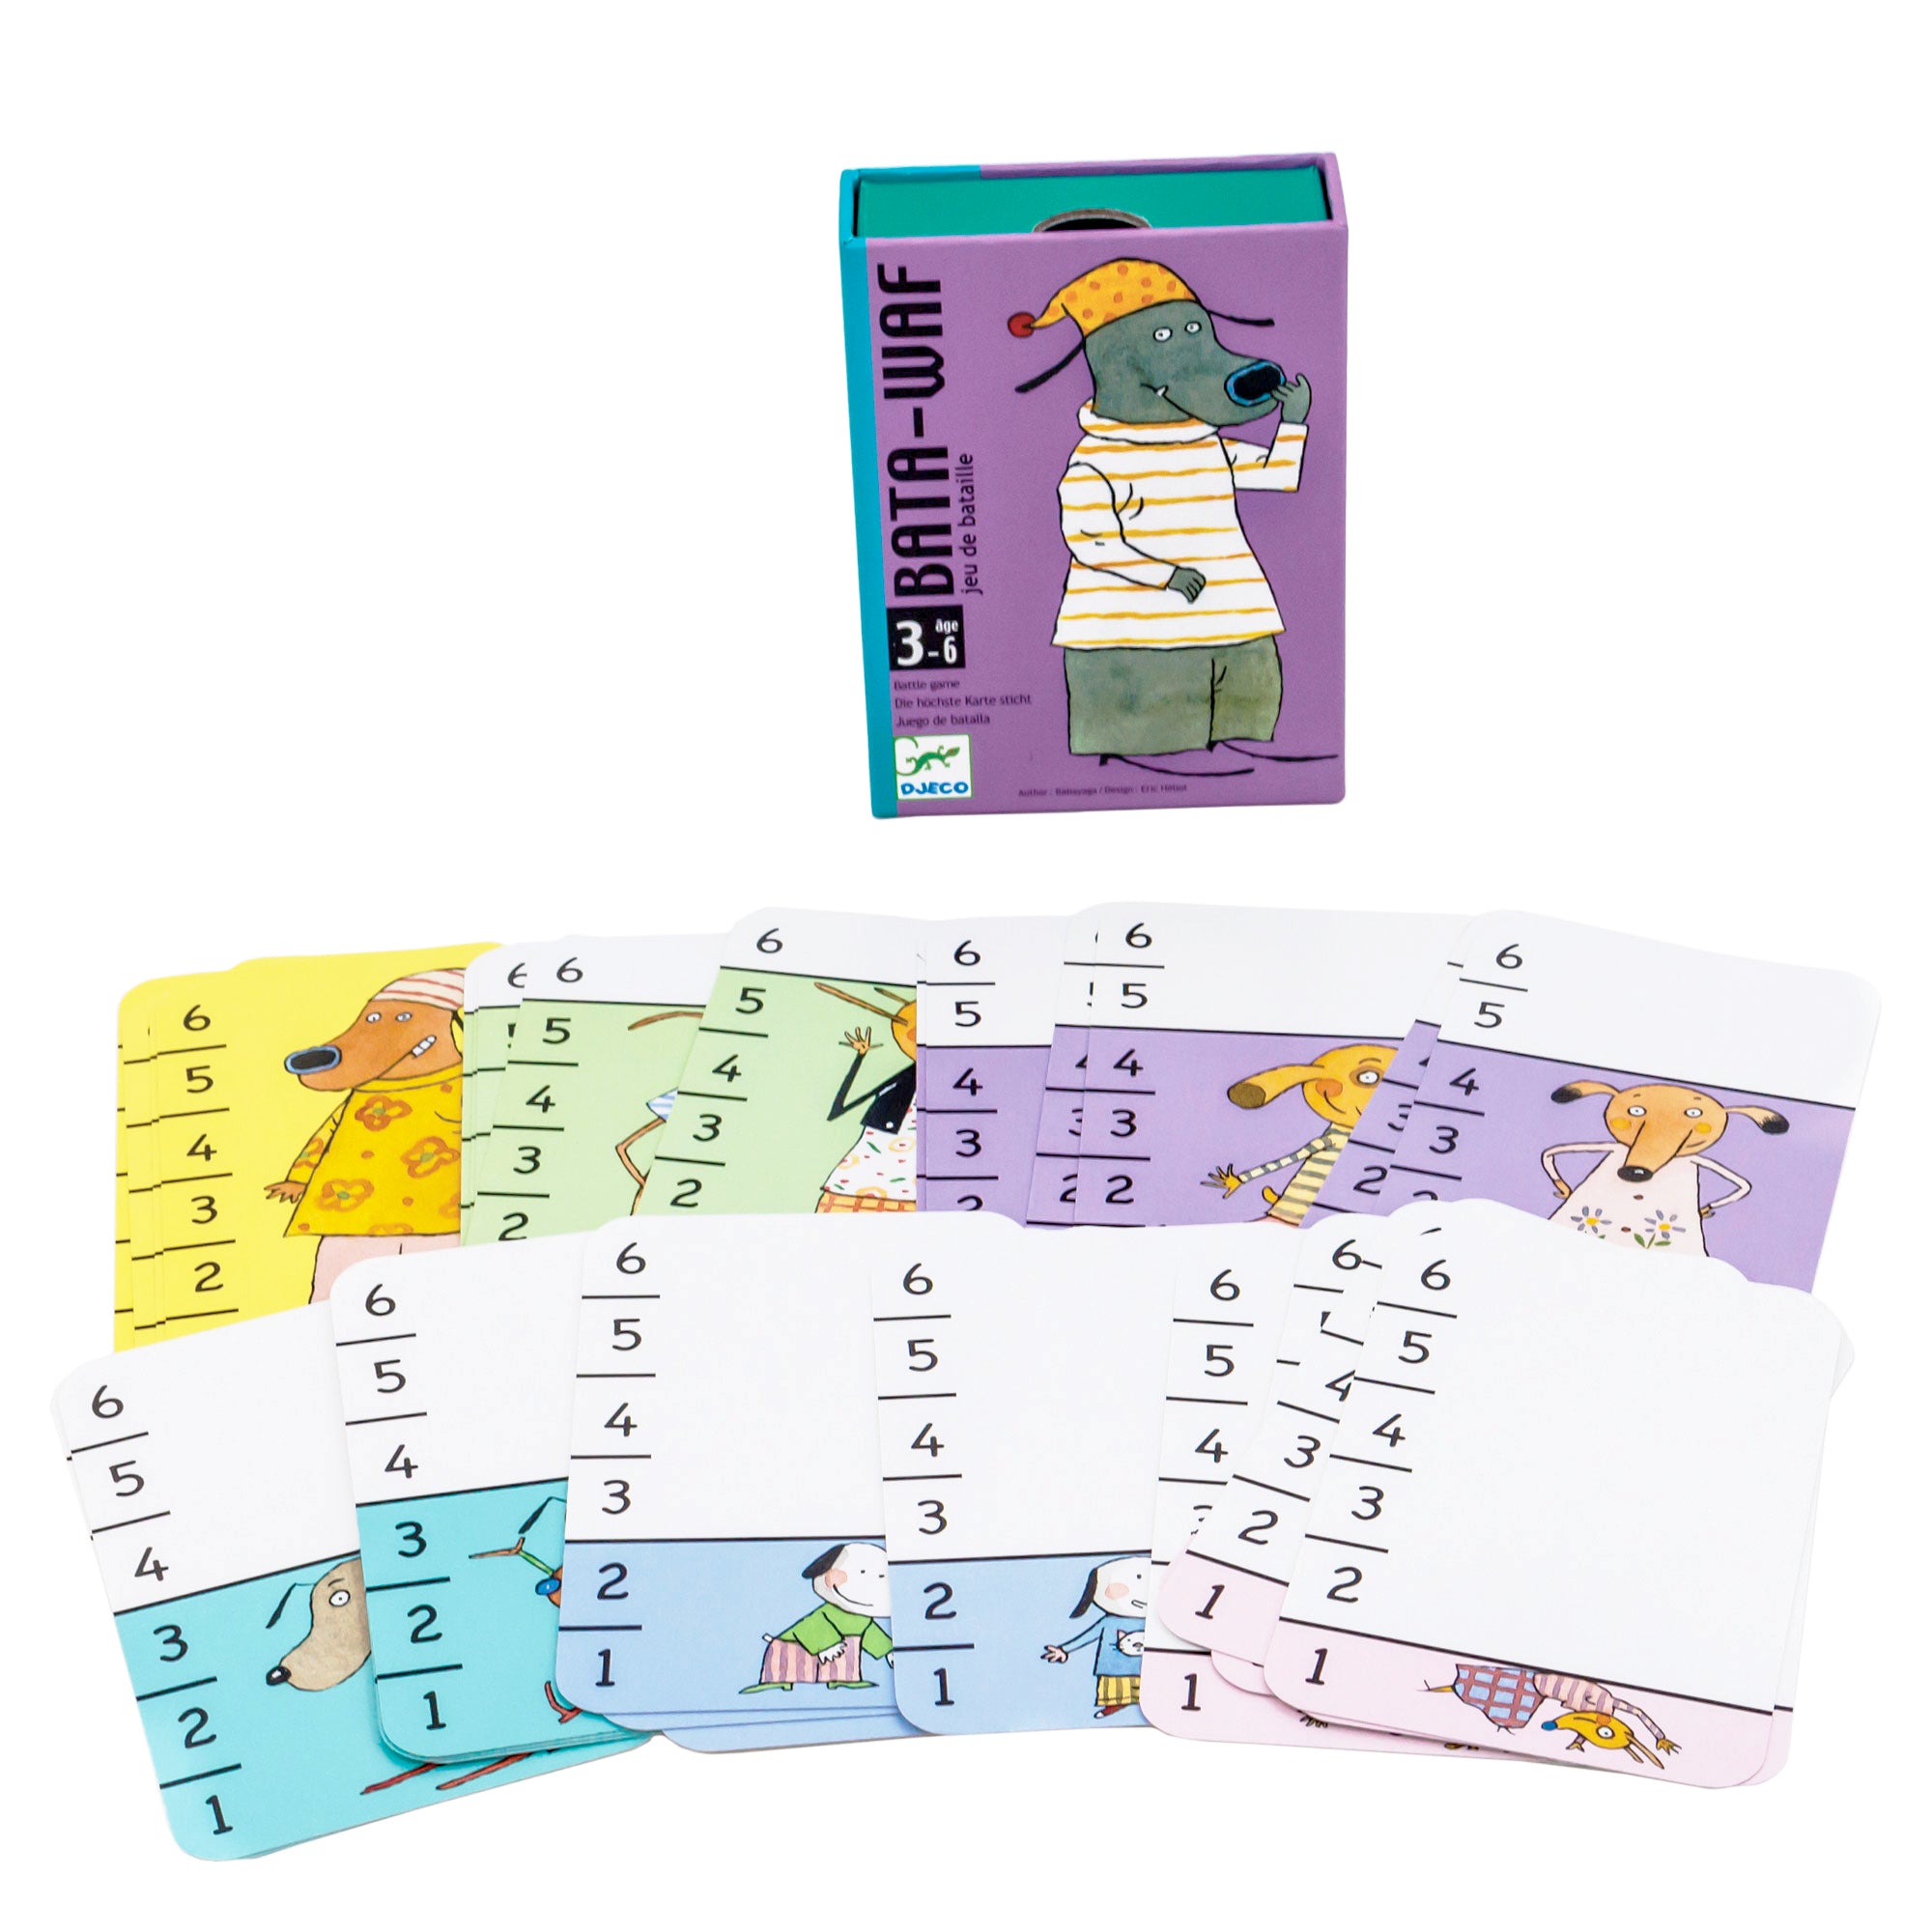 Djeco Bata-Waf card game box surrounded by cards. In the back, the card box is purple with teal sides. On the cover is a gray dog touching its’ nose. It is wearing a stocking cap, striped shirt, and gray pants. In front of the box are 2 rows of cards, fanned out. They are in different colors and all have the numbers 1 through 6 on the left side going from the bottom to the top. Each animal on the card is measured by the numbers, to indicate their size.